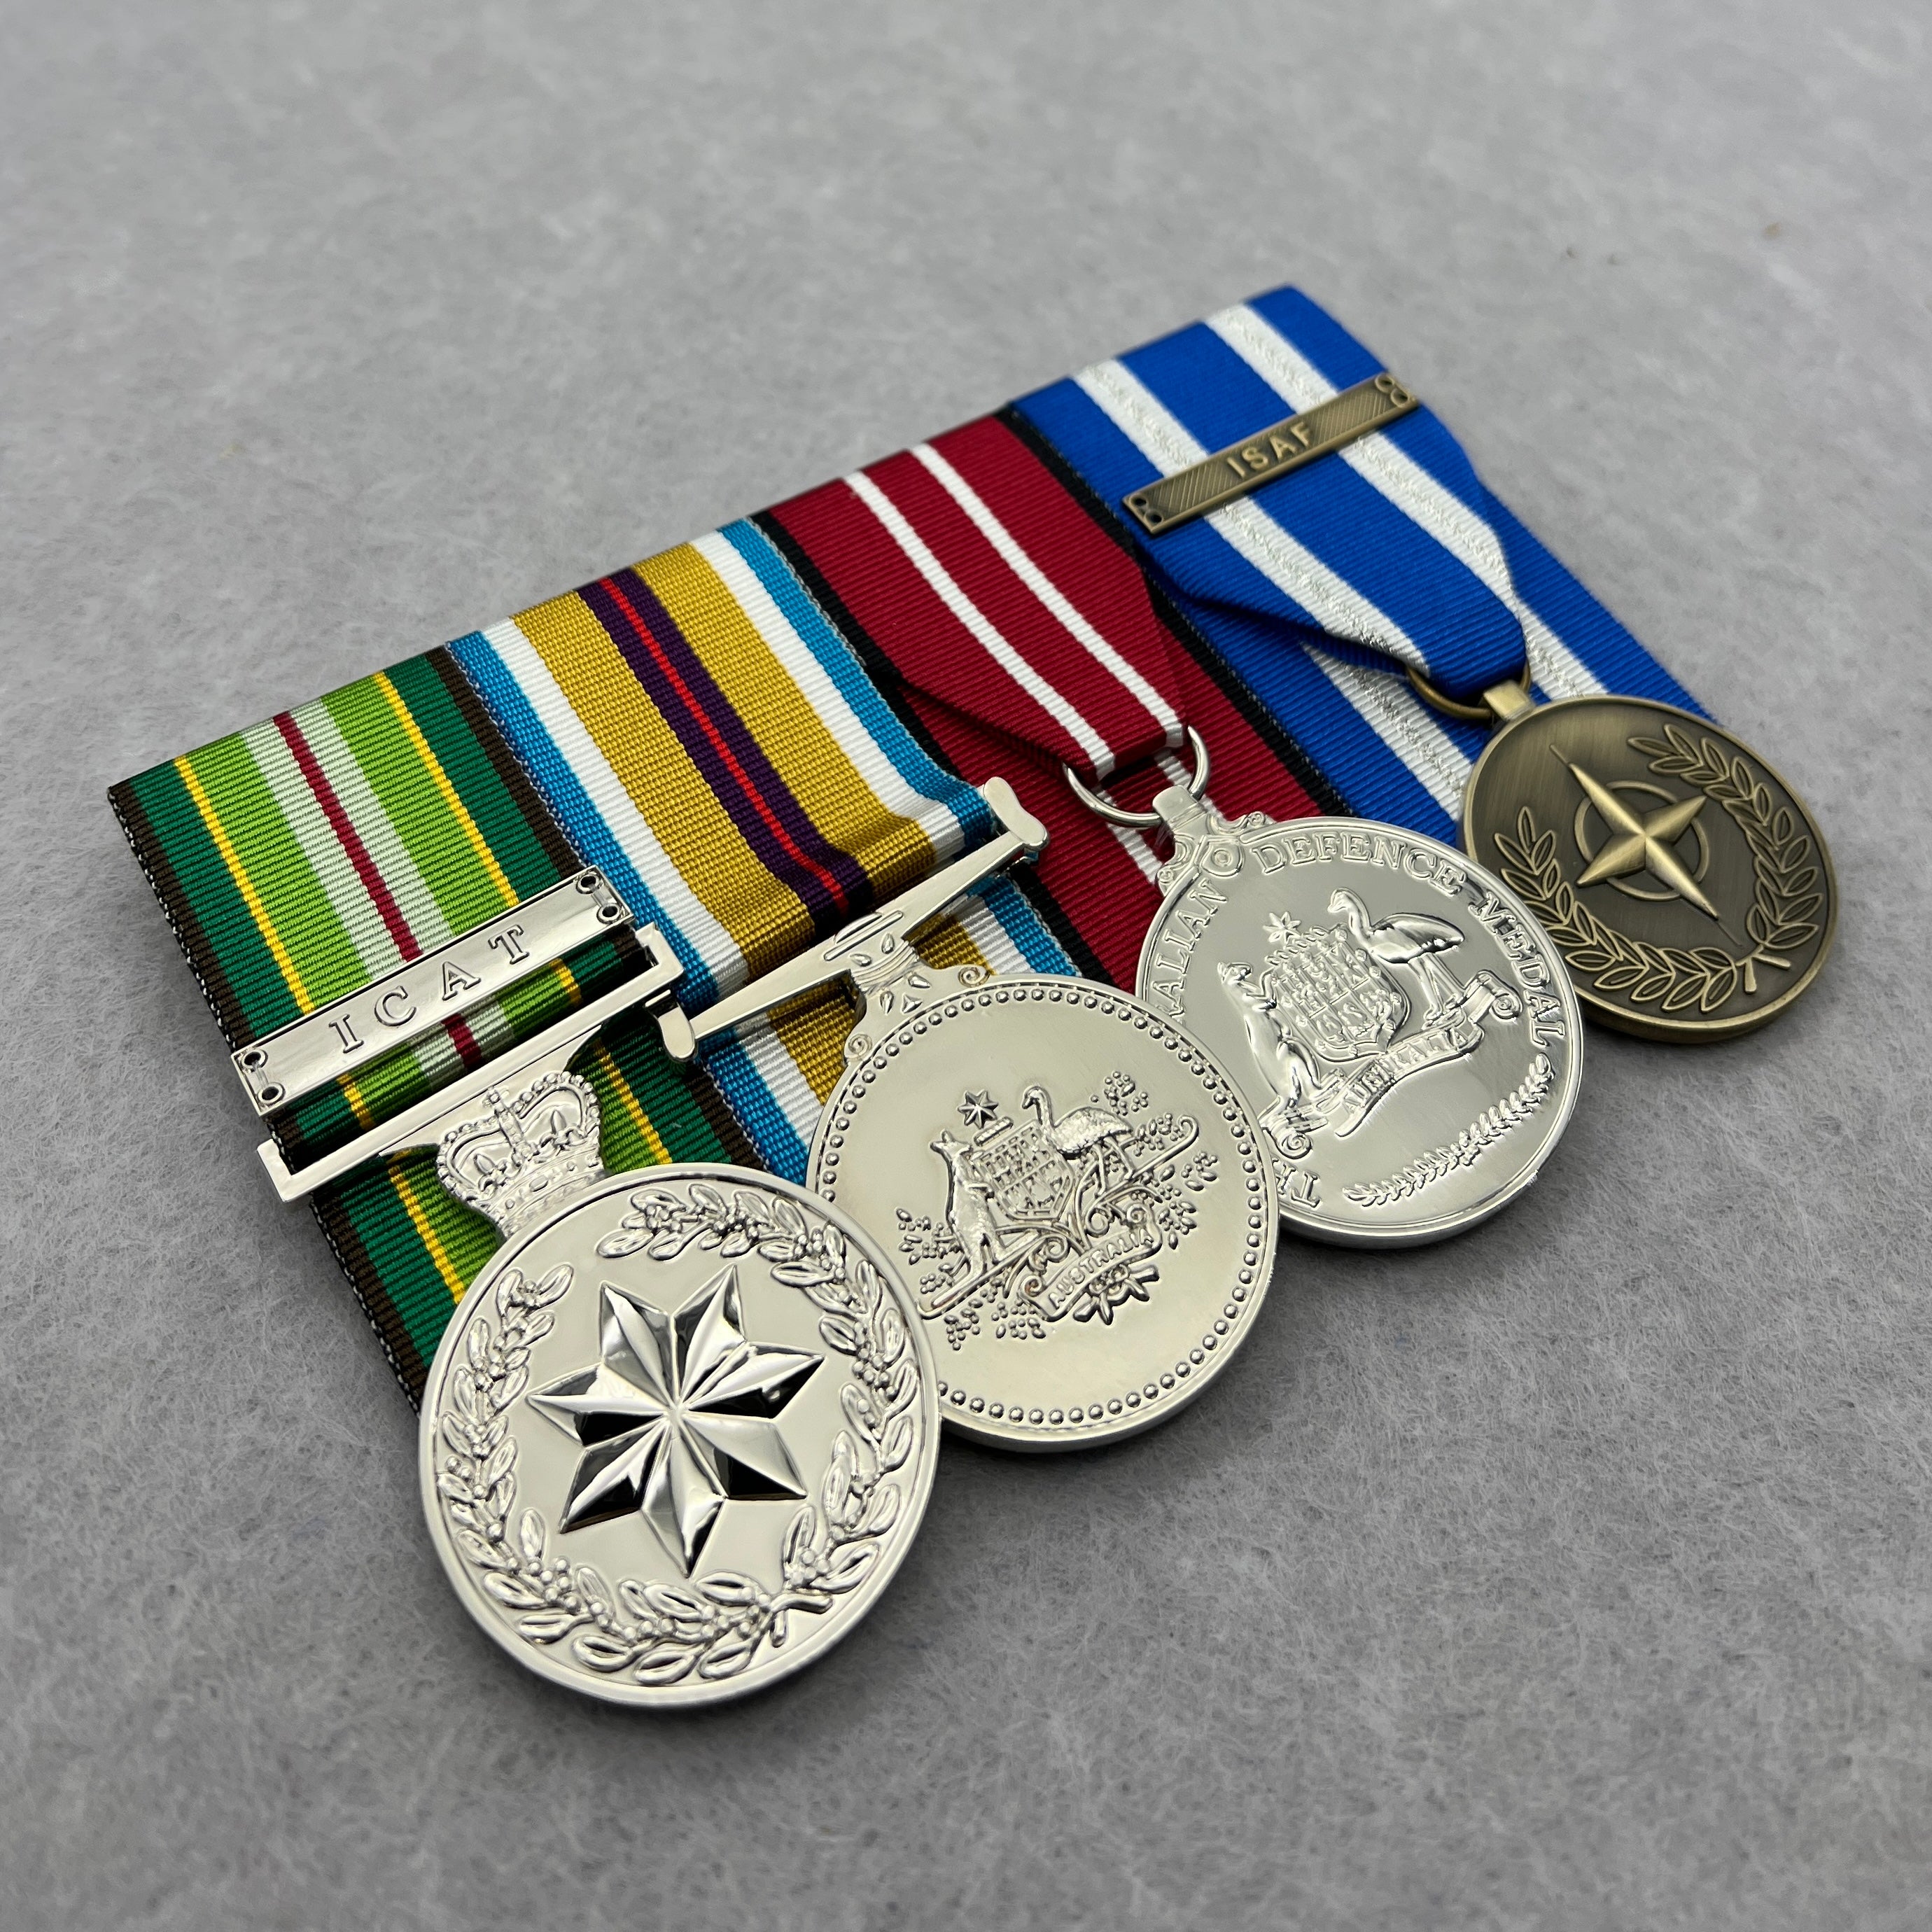 AASM-ICAT / Afghanistan NATO Service Group - Foxhole Medals